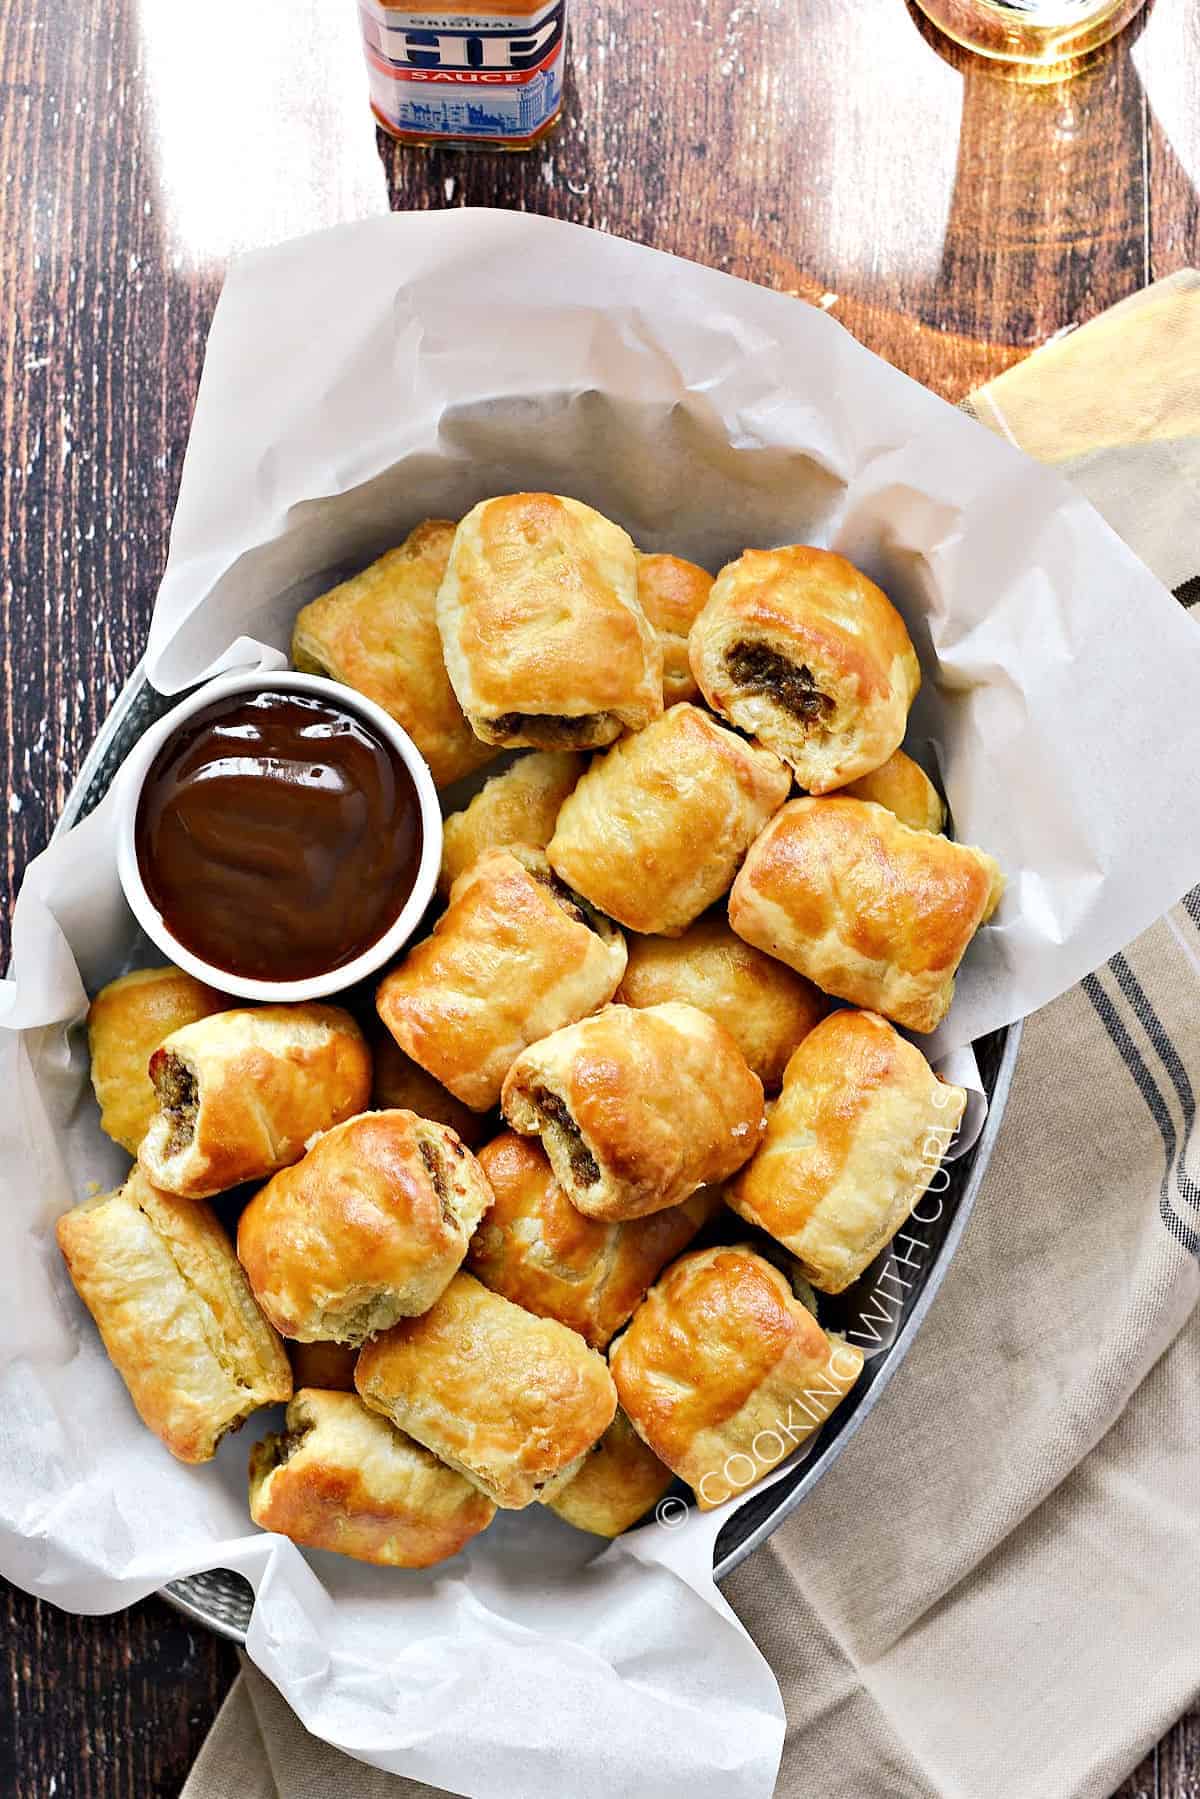 Puff-Pastry-Sausage-Rolls-in-a-paper-lined-silver-tray-with-a-bowl-of-HP-Sauce.